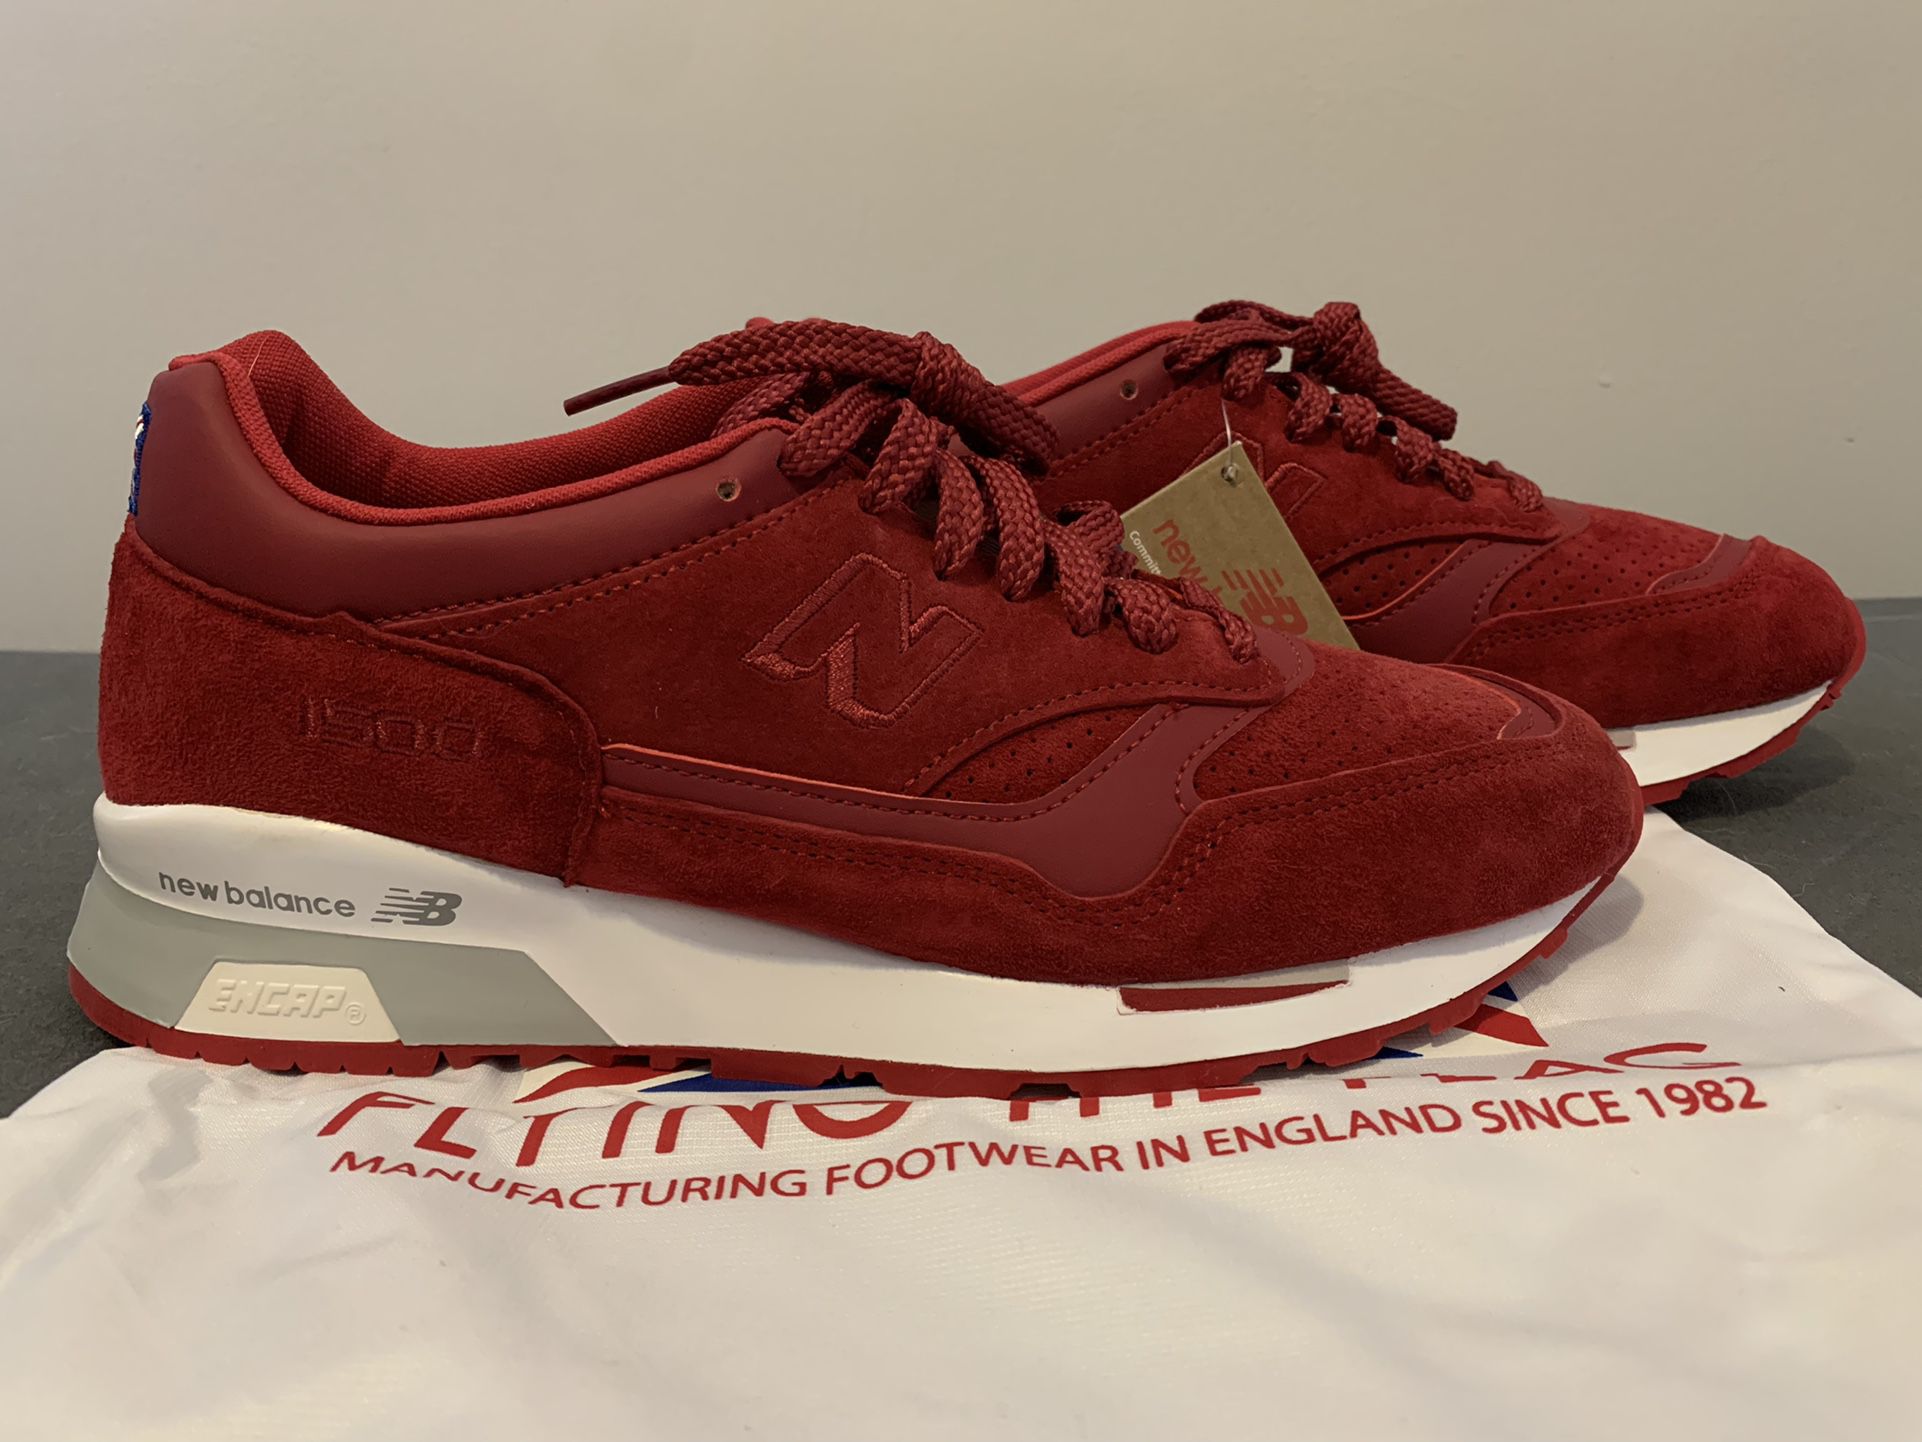 New Balance 1500 Flying The Flag Size 7 for Los Angeles, CA OfferUp